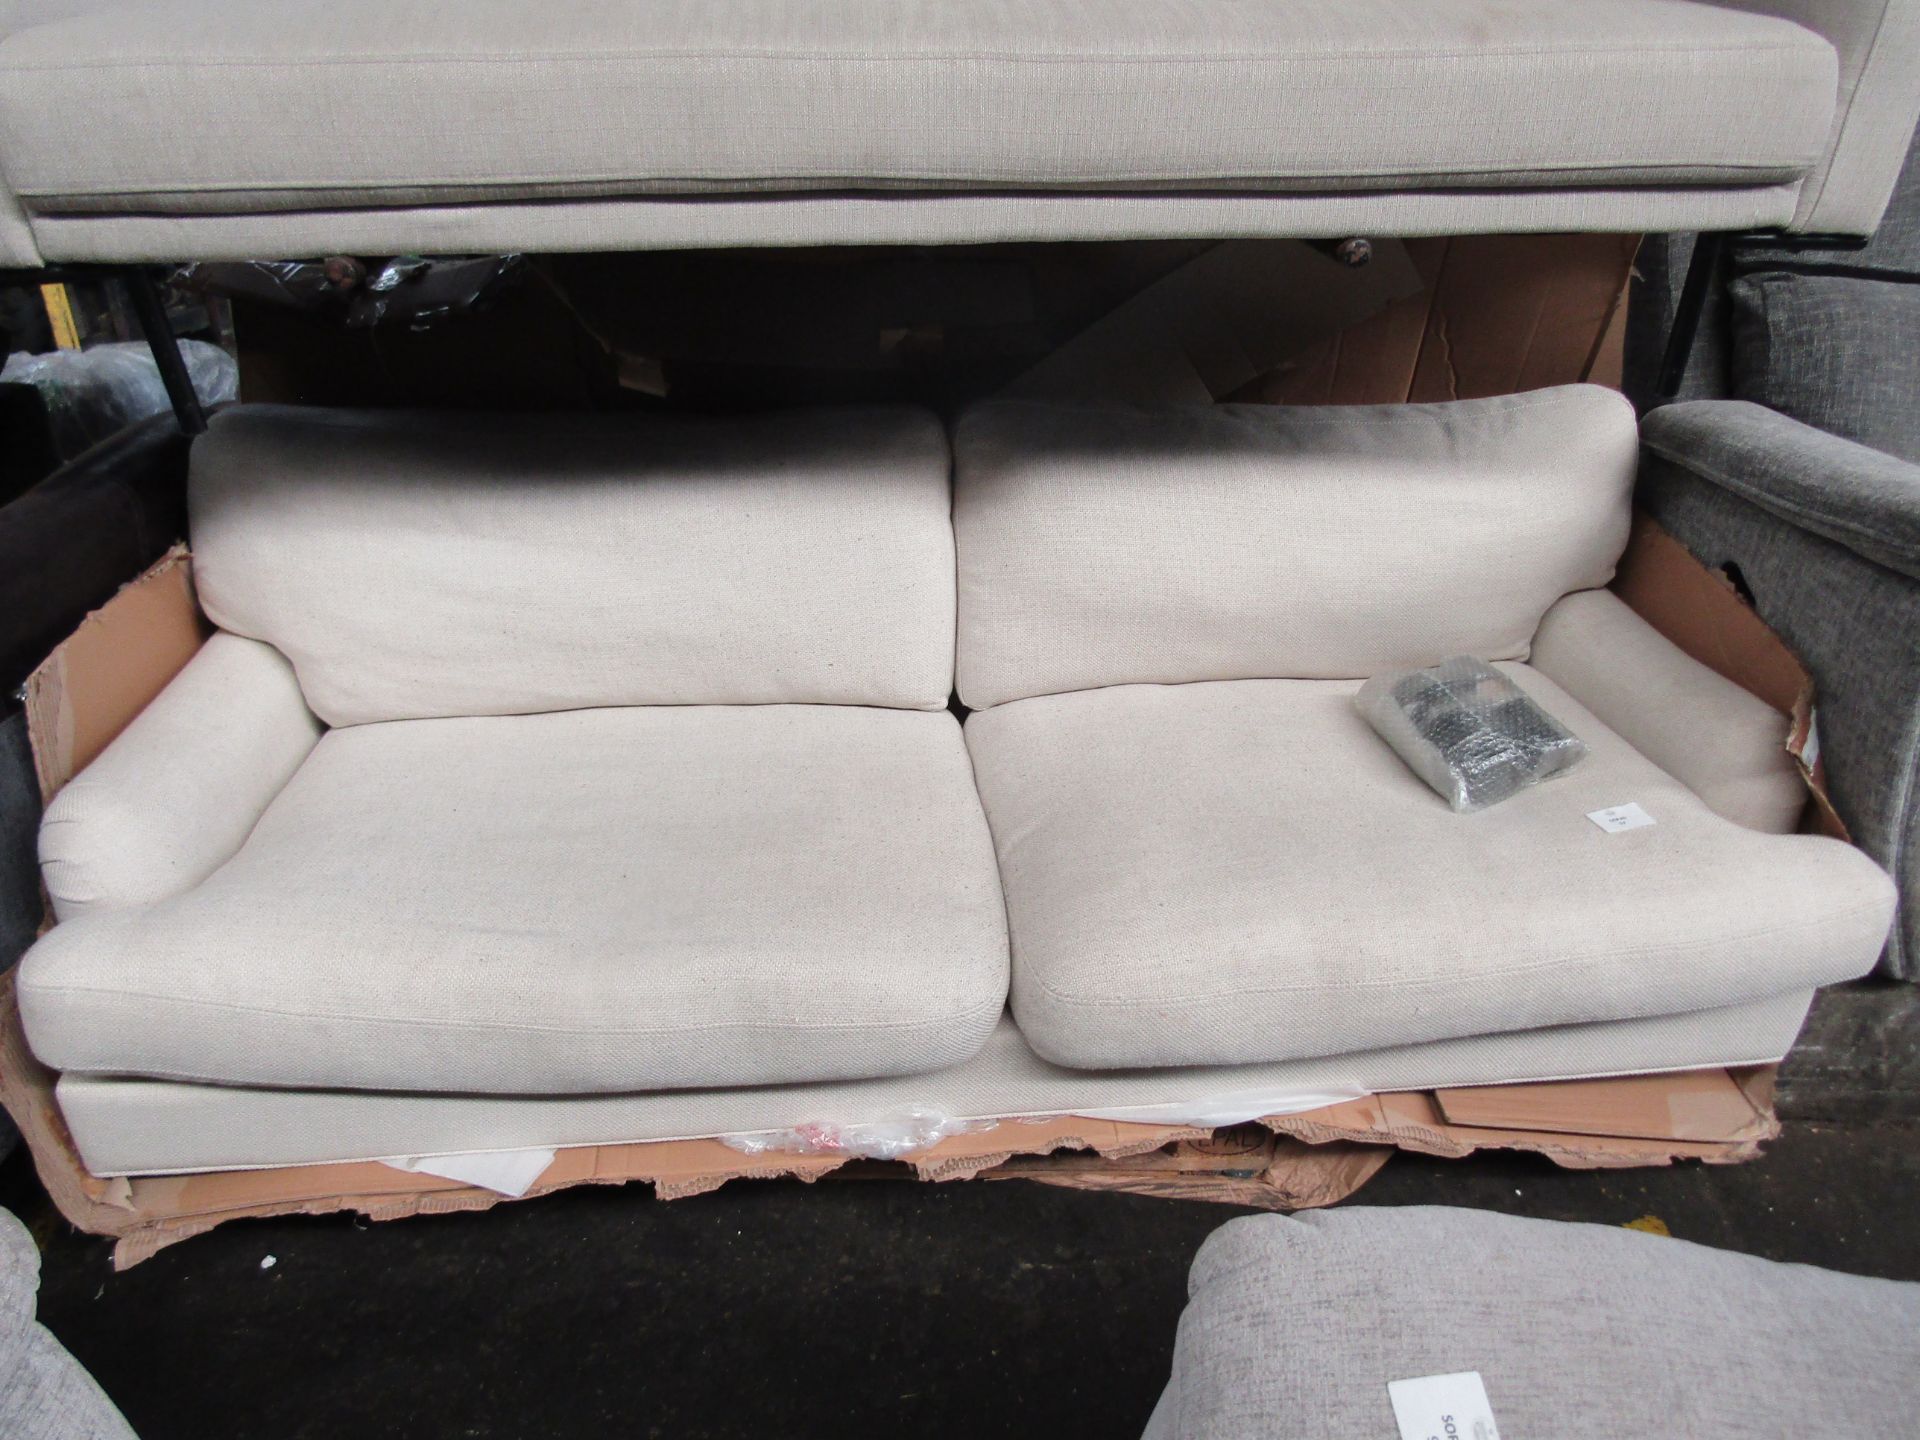 Dusk Hampshire 3 Seater Sofa - Beige RRP 899 Hampshire 3 Seater Sofa - BeigeStunning in its - Image 2 of 2